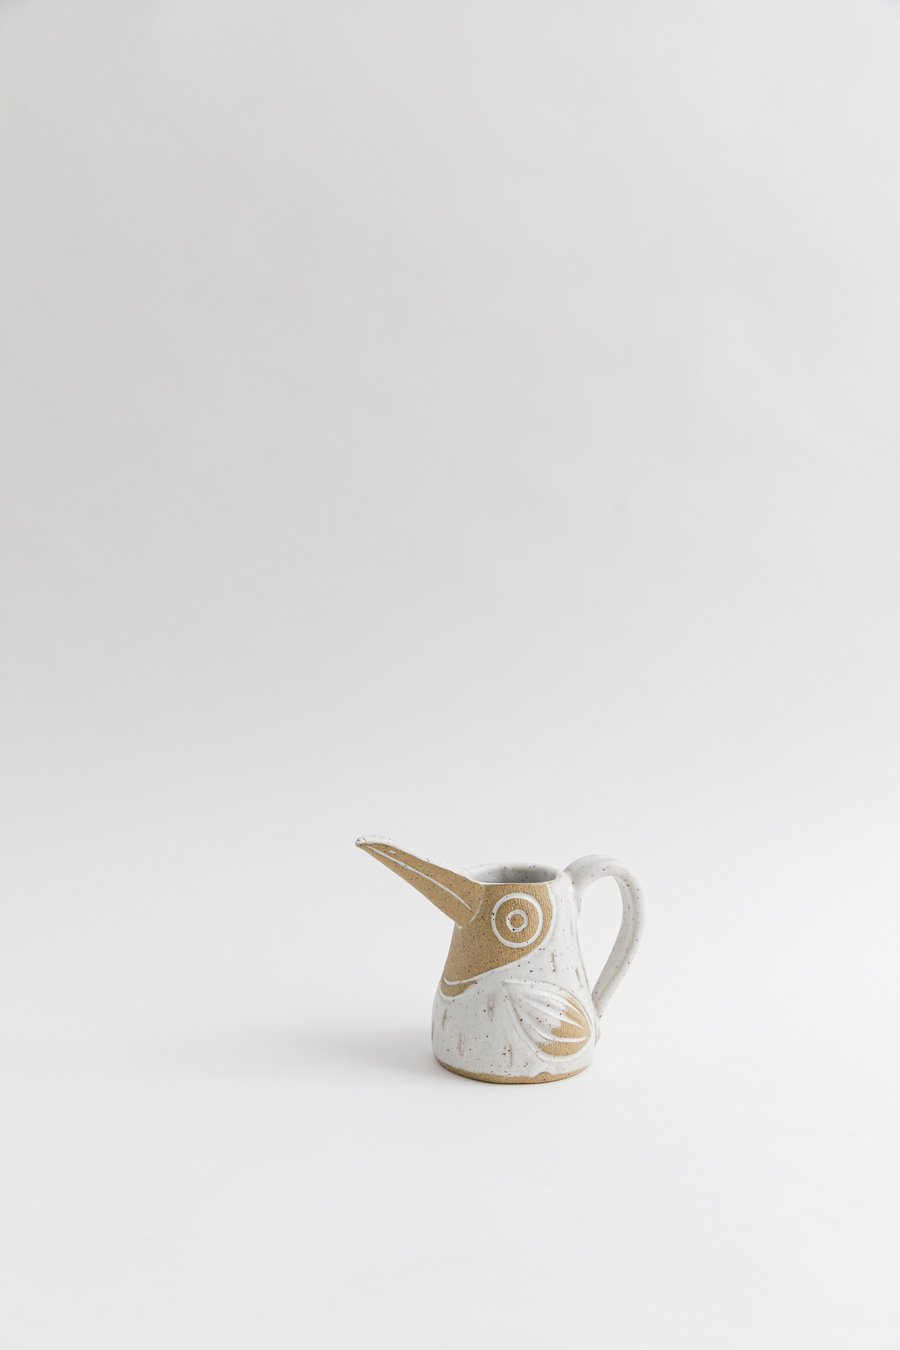 Image of Matte White Feathered Baby Toucan Creamer with Handle